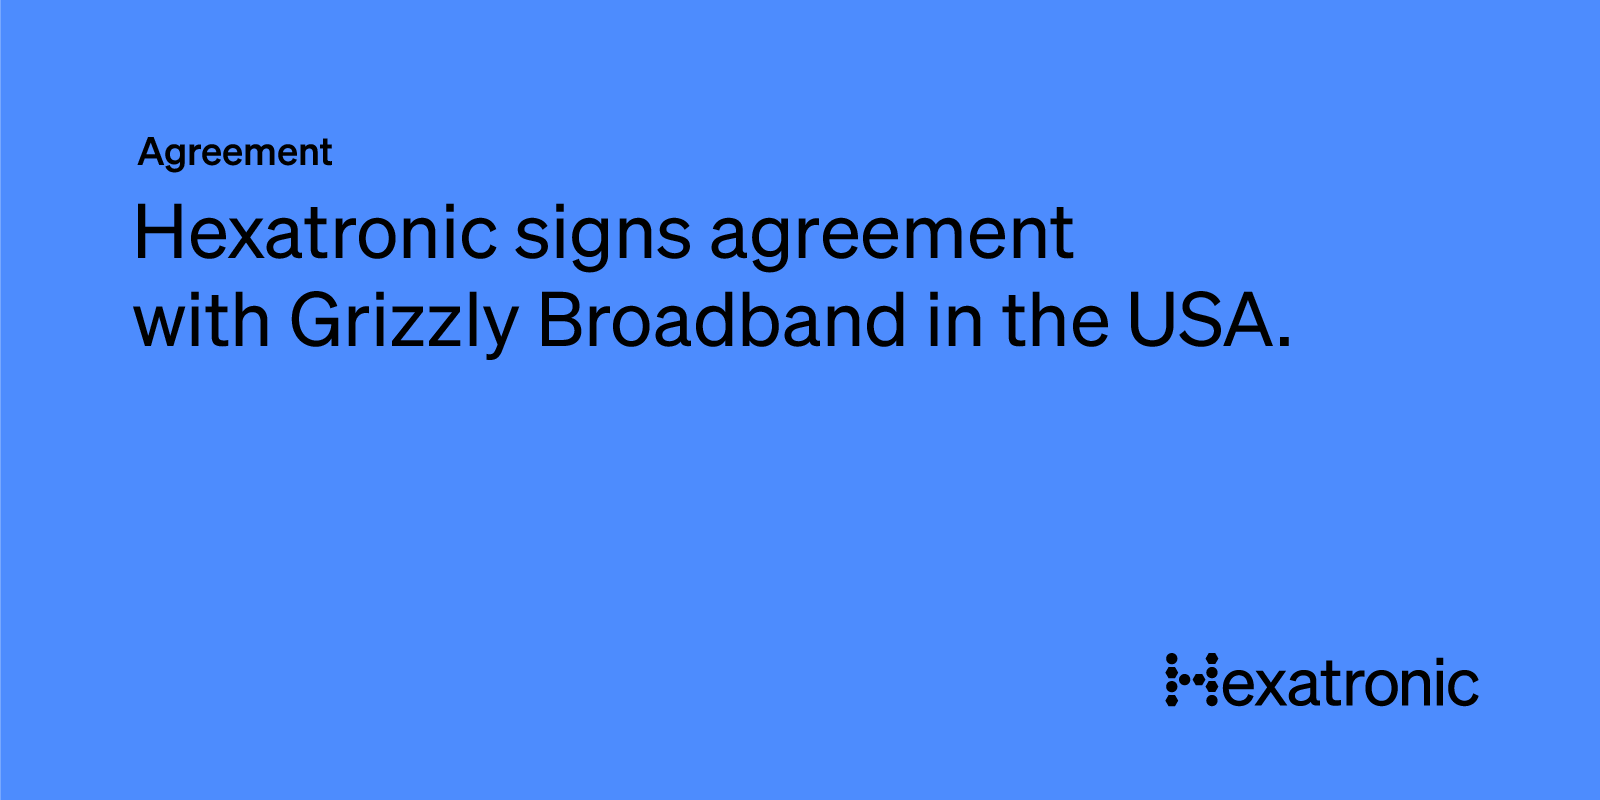 Hexatronic signs agreement with Grizzly Broadband in the US to a value of over 15 MUSD.